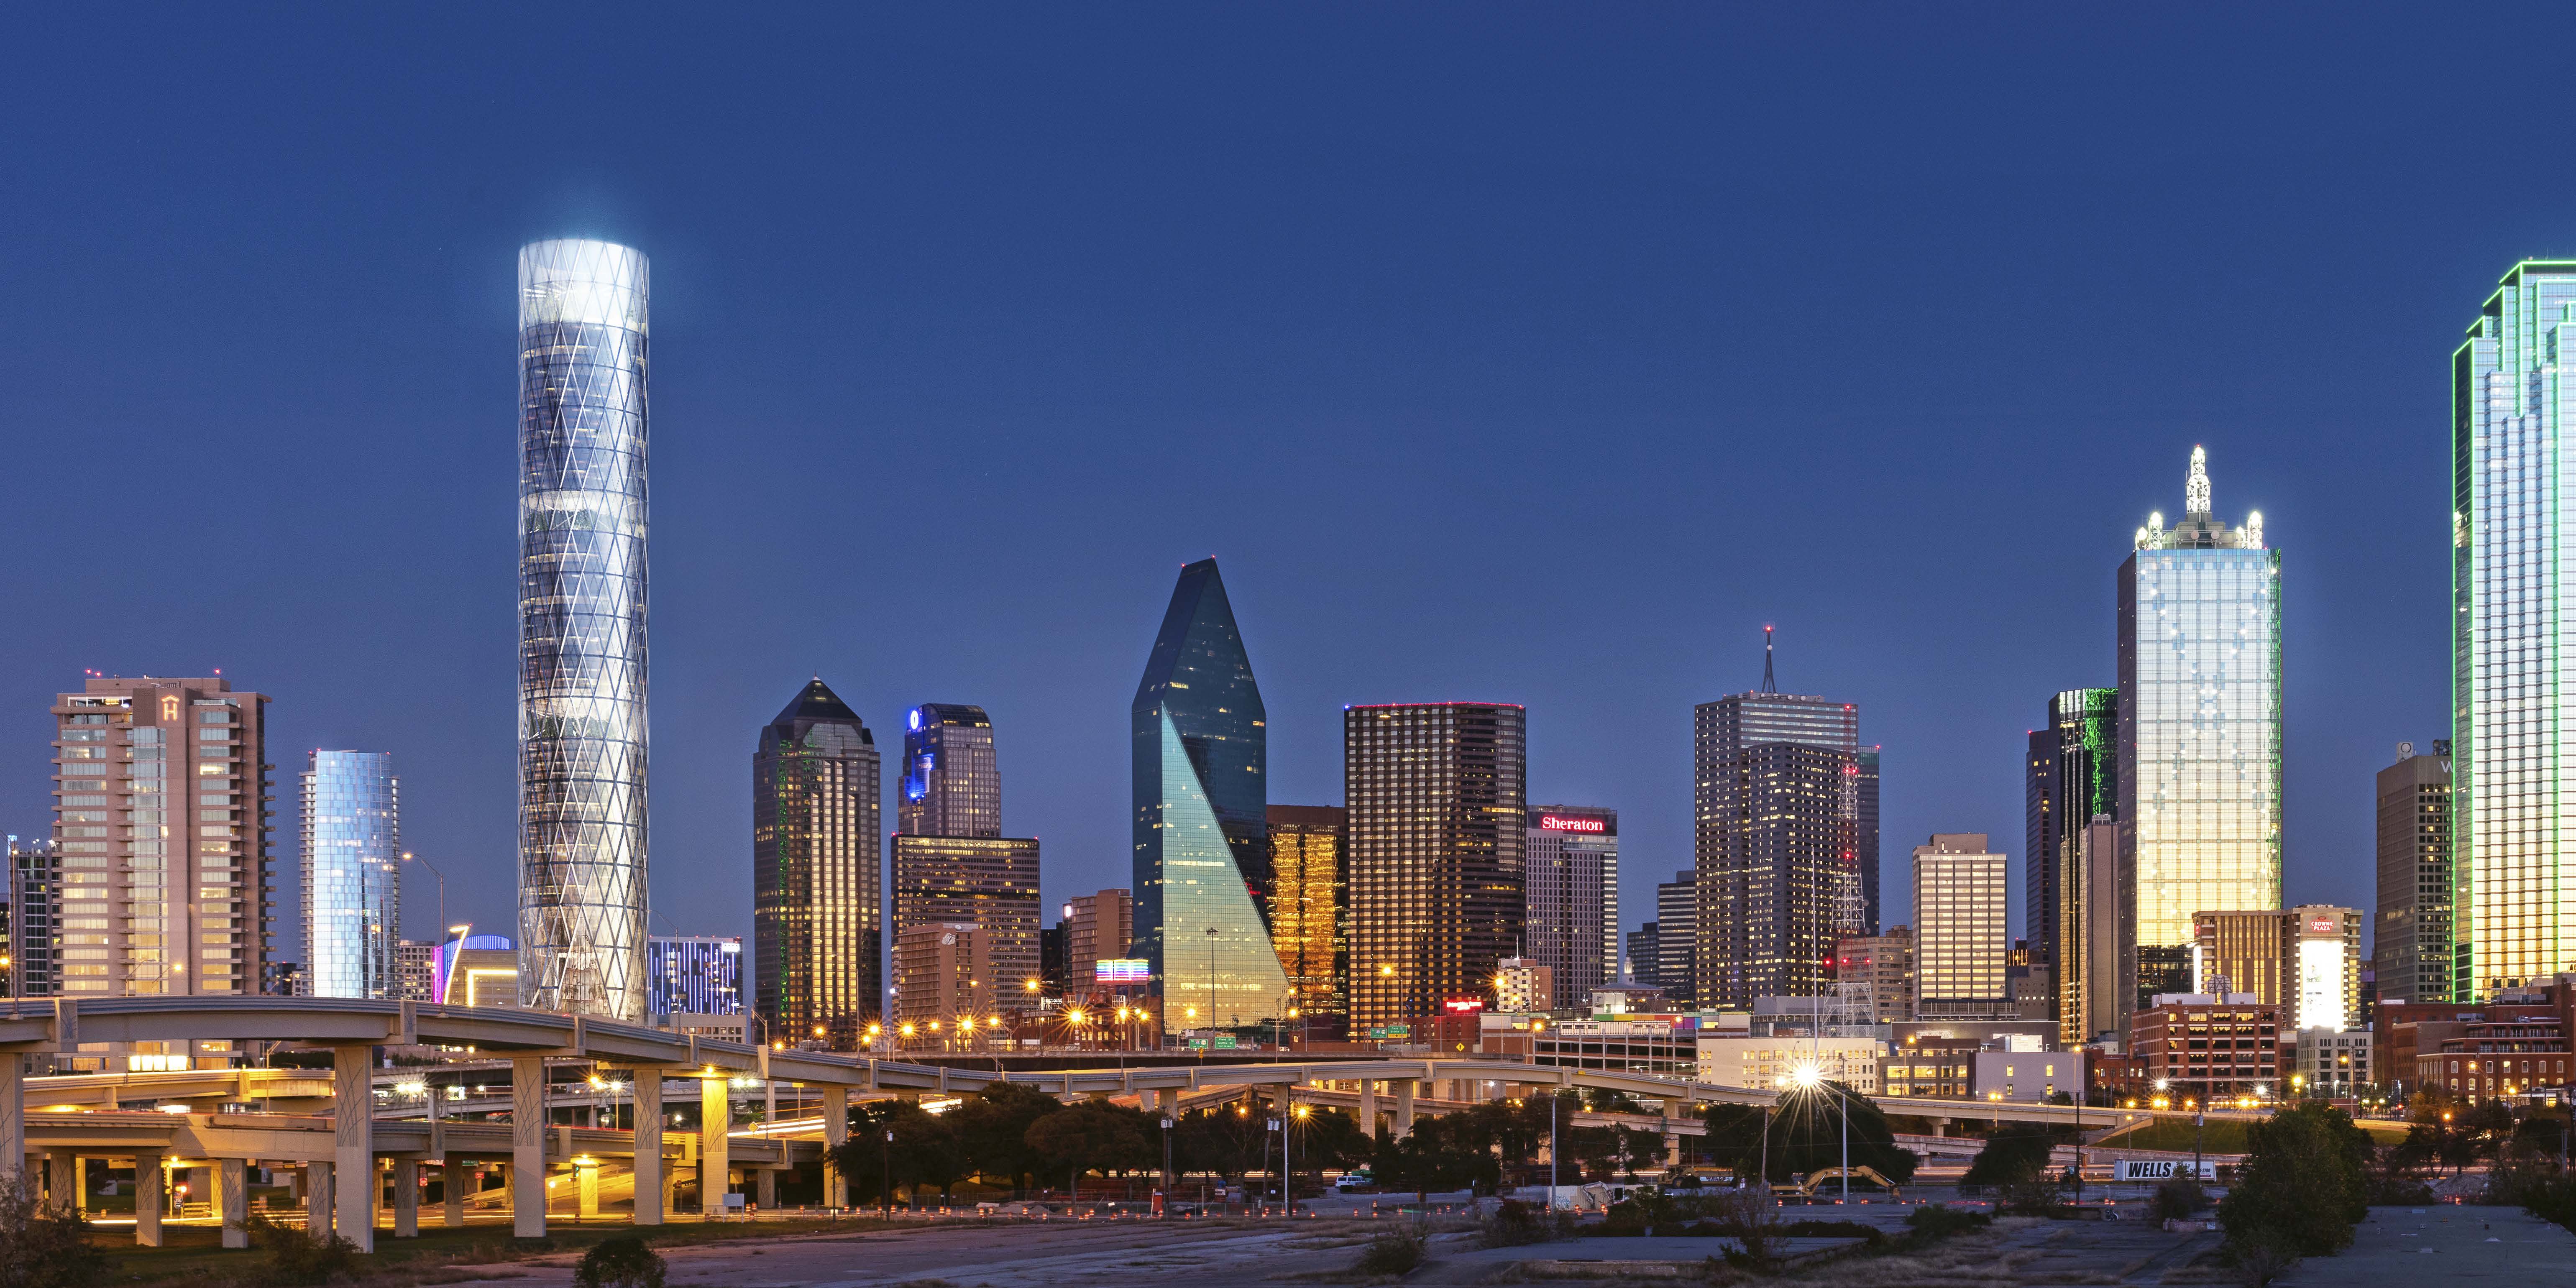 Round skyscraper by famed architect would remake Dallas' skyline | Real Estate ...6159 x 3080